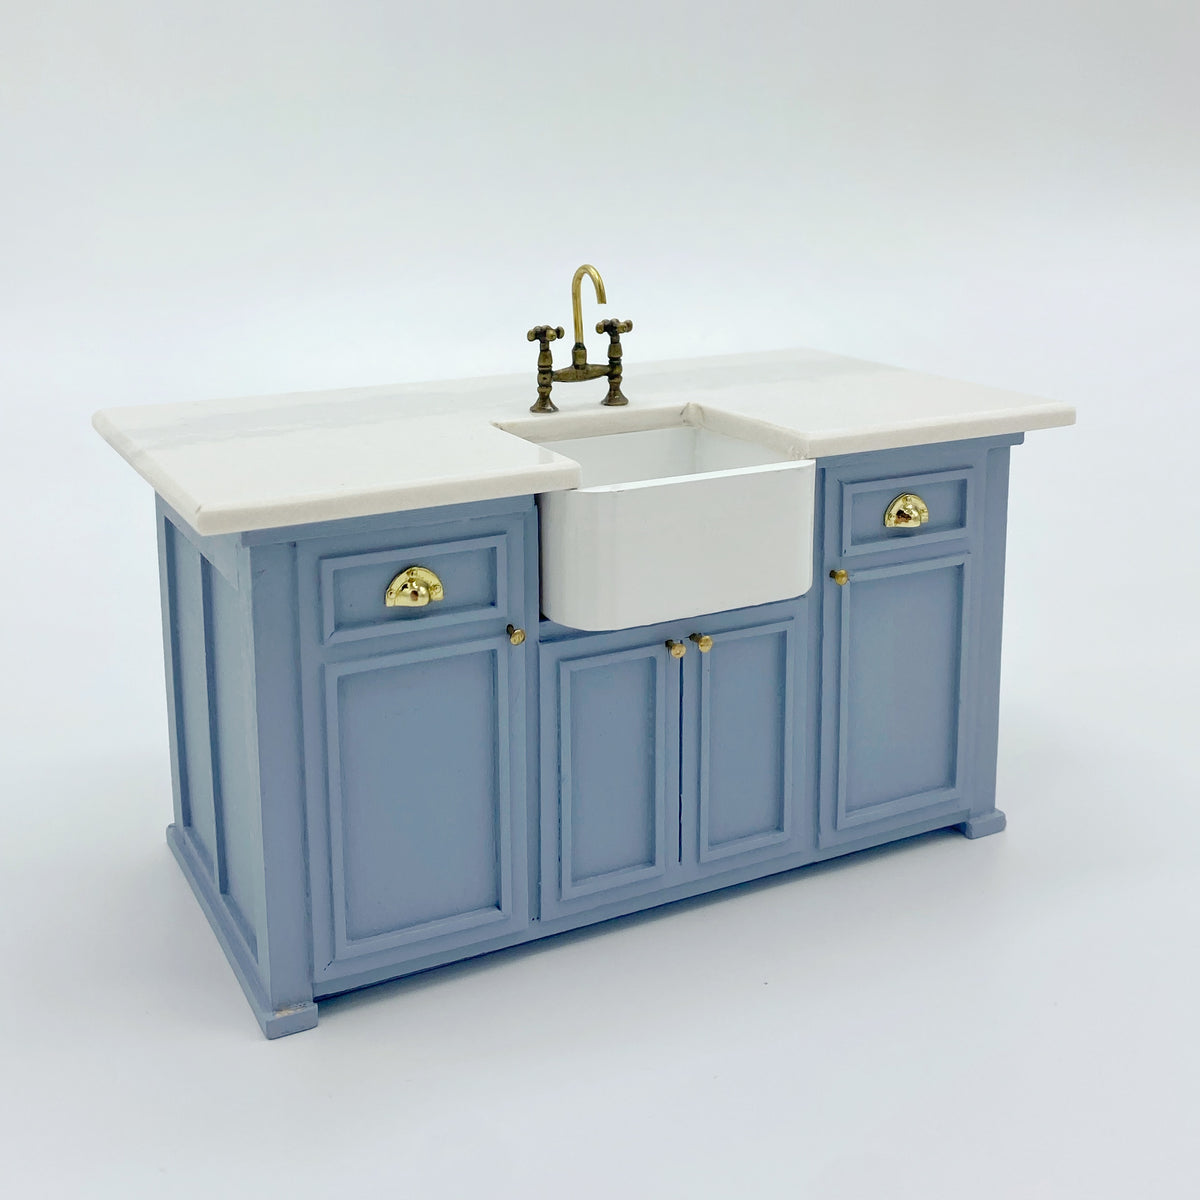 Custom Dollhouse Kitchen Island With Sink - 1:12 scale by Life In A Do ...